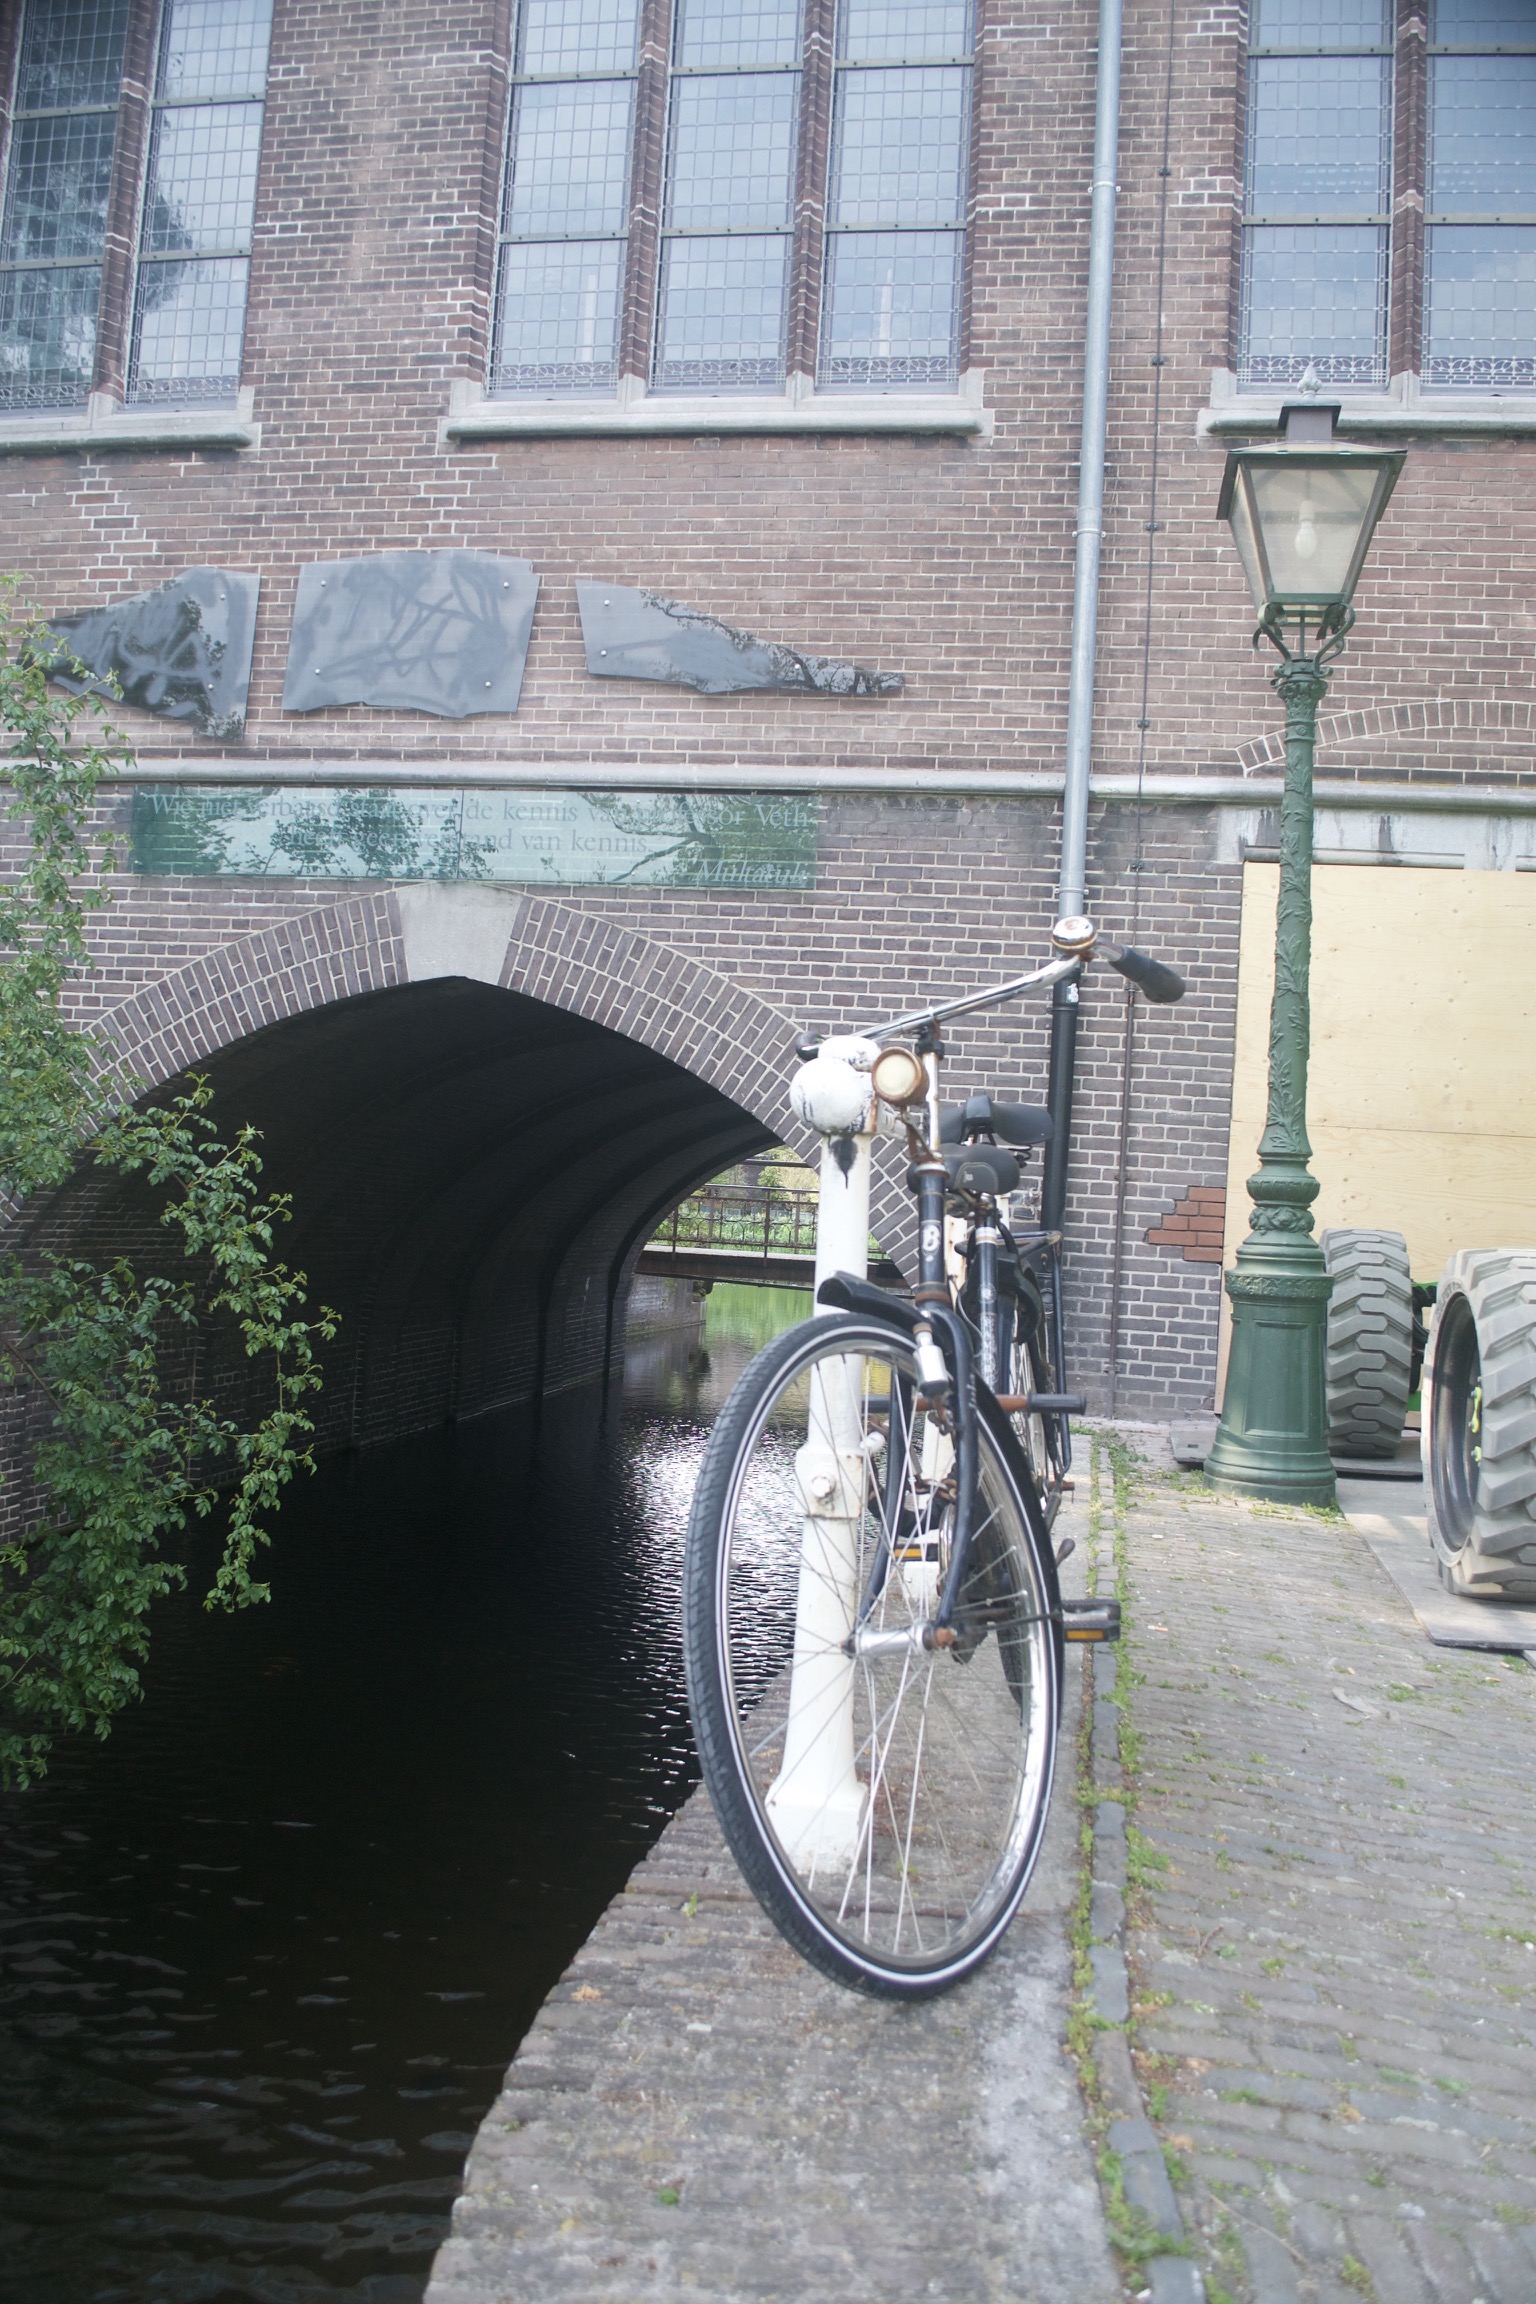 A bicycle locked to a post on the edge of a canal which goes through a tunnel in a building in the background.